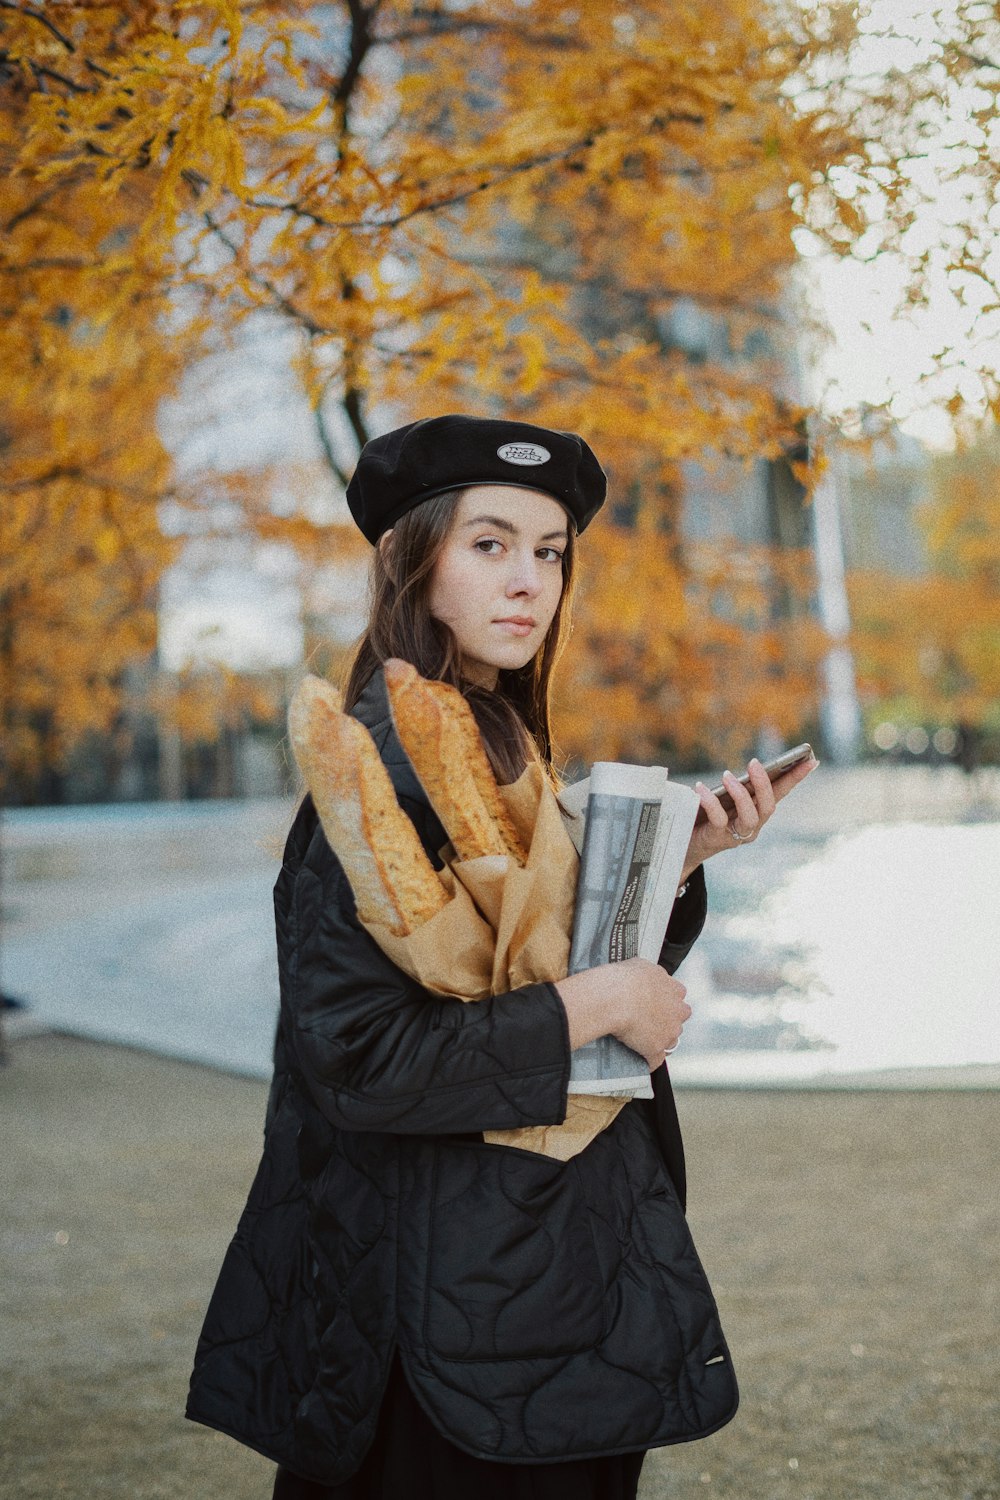 a person in a black hat and coat holding a newspaper